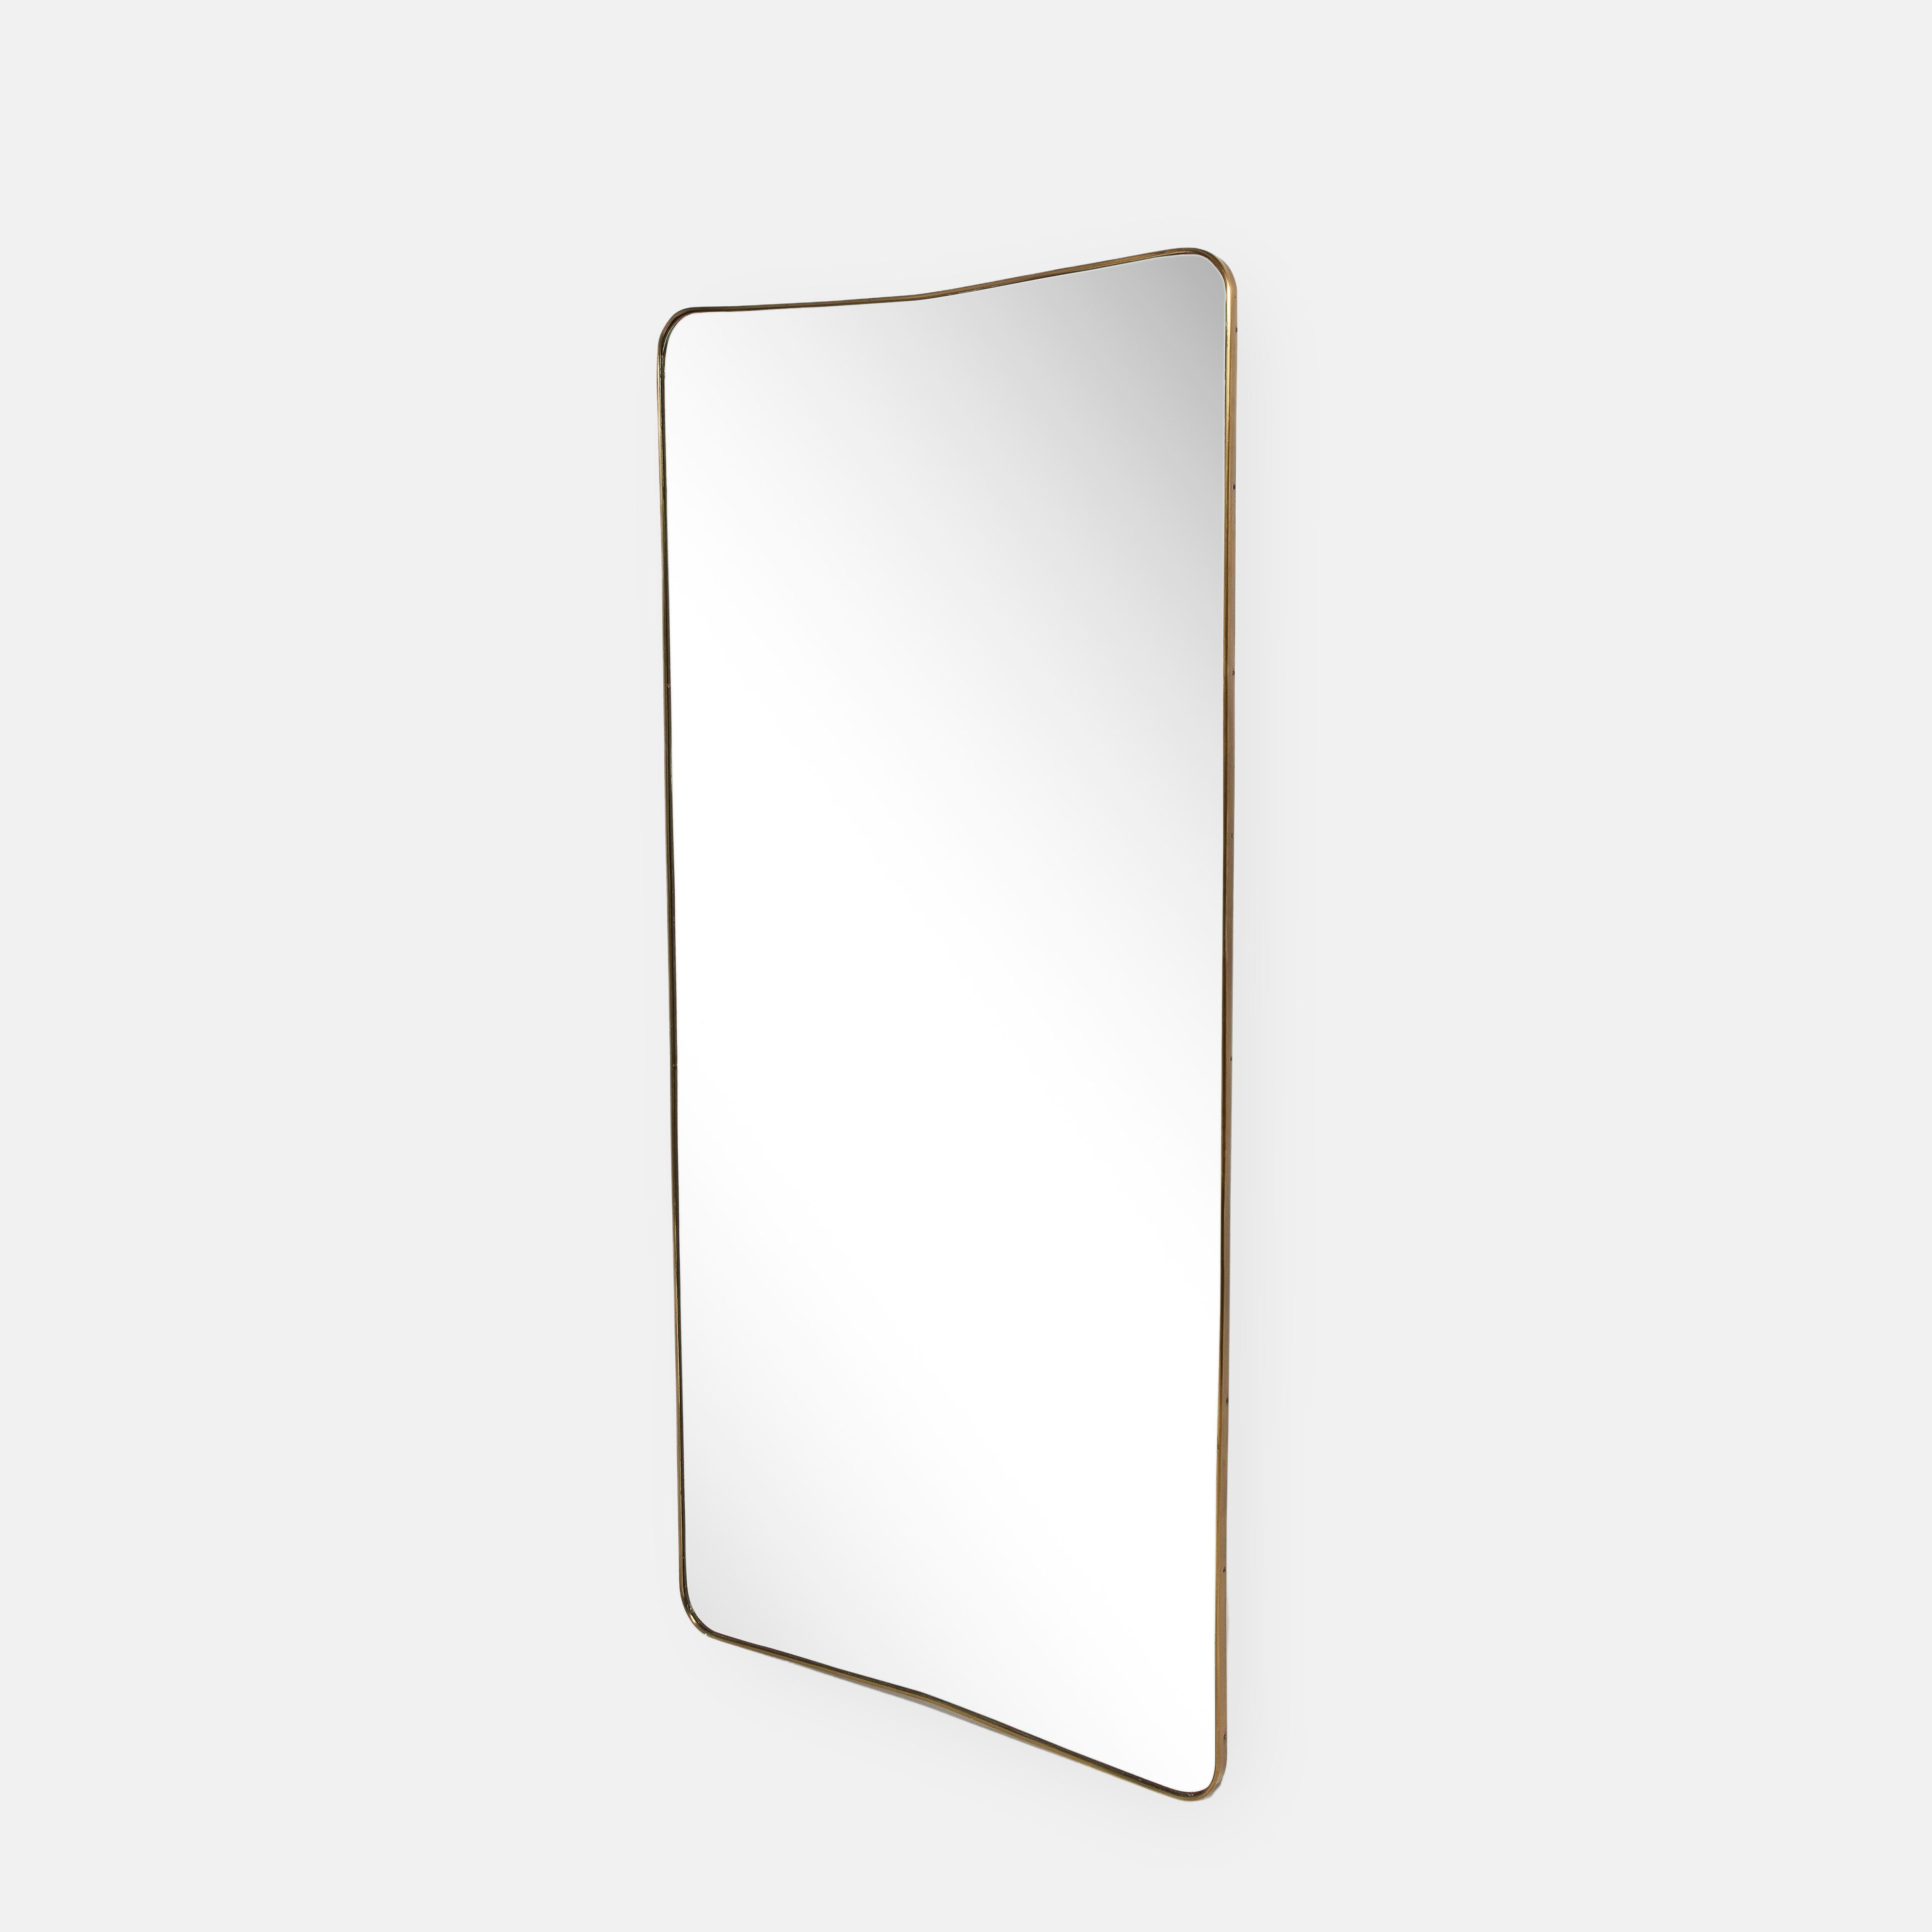 1950s rare original Fontana Arte modernist grand scale wall mirror consisting of shaped brass frame with gently arched and rounded top which slightly tapers towards the bottom and original mirrored crystal glass This chic and rare mirror is